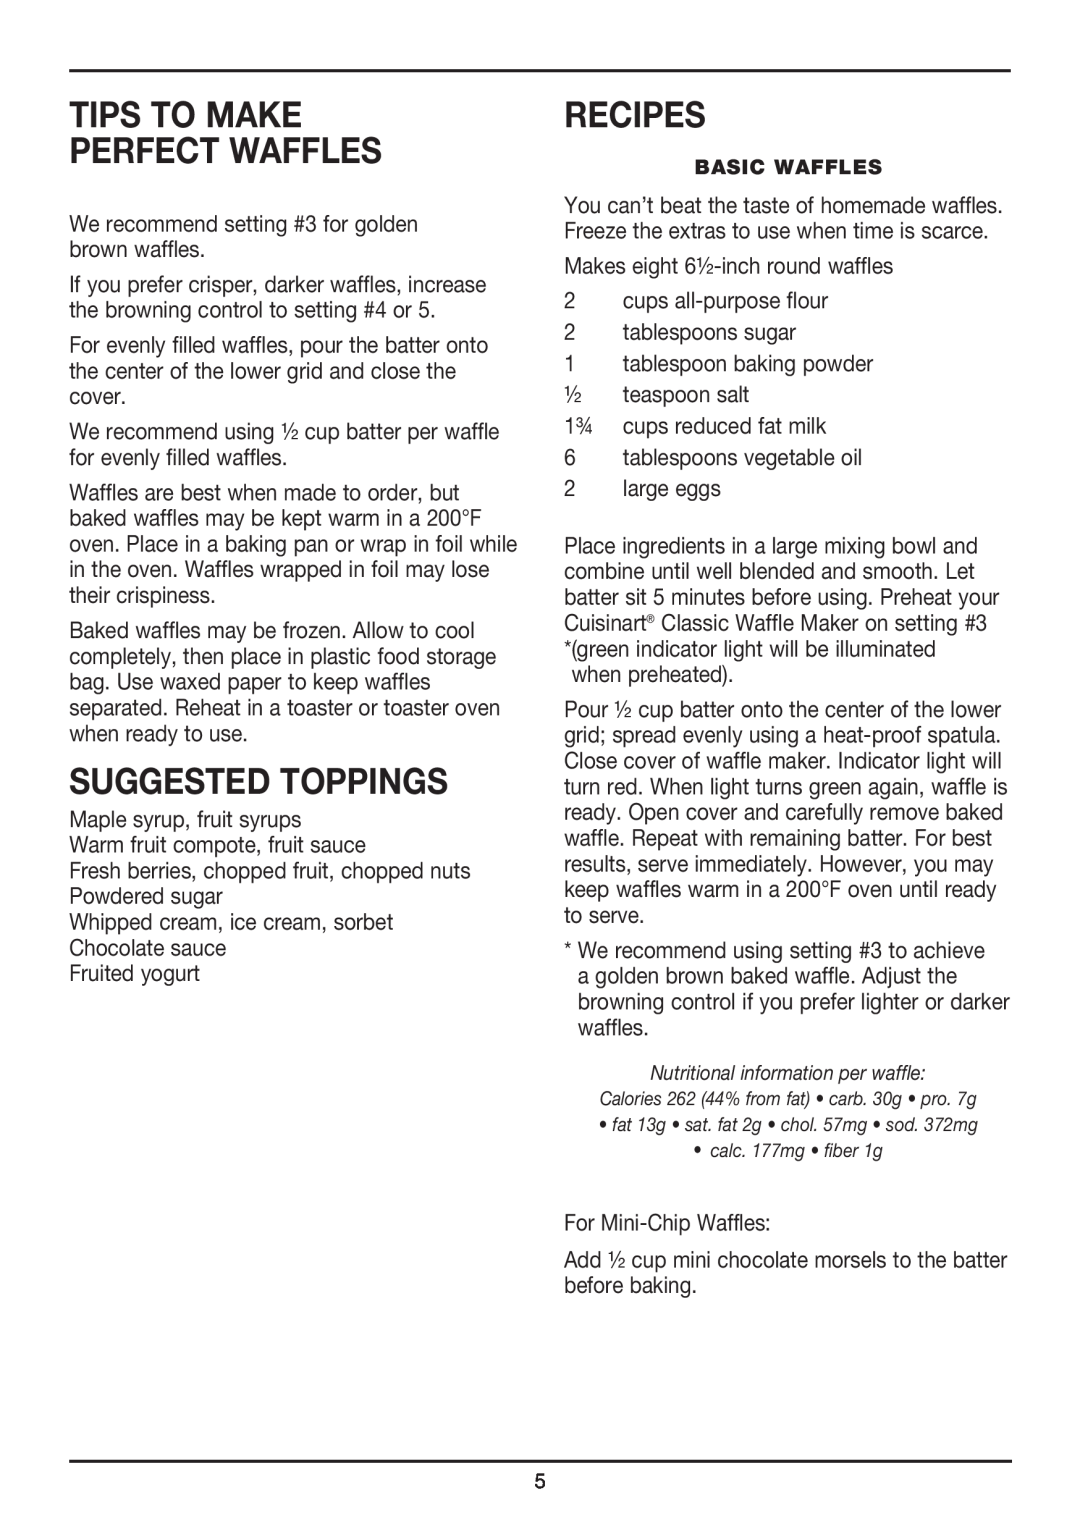 Cuisinart WMR-CA manual Tips To Make Perfect Waffles, Suggested Toppings, Recipes 